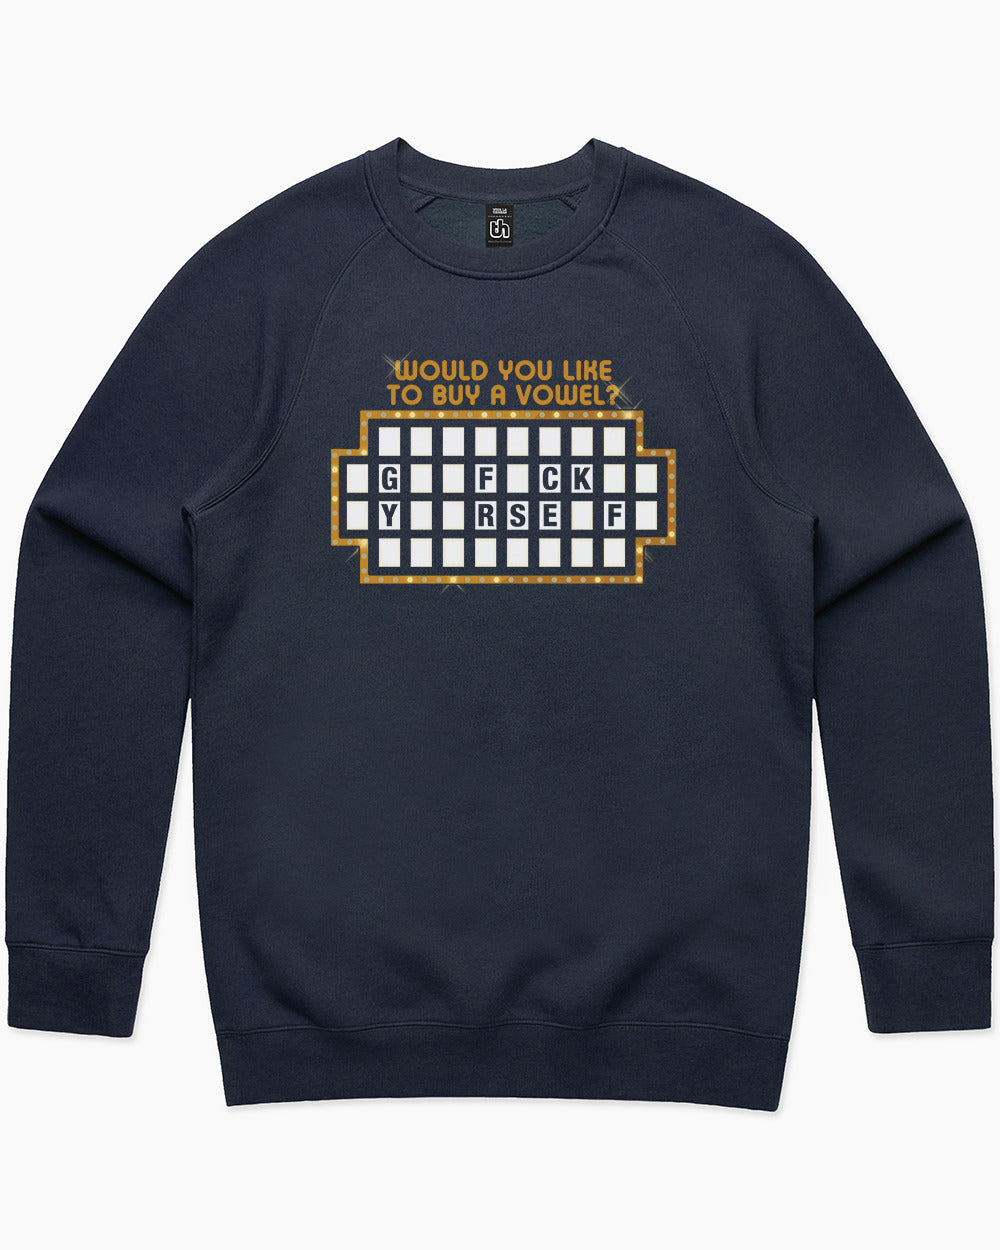 Would You Like To Buy A Vowel Or Would You To Buy A Vowel Sweater Australia Online #colour_navy